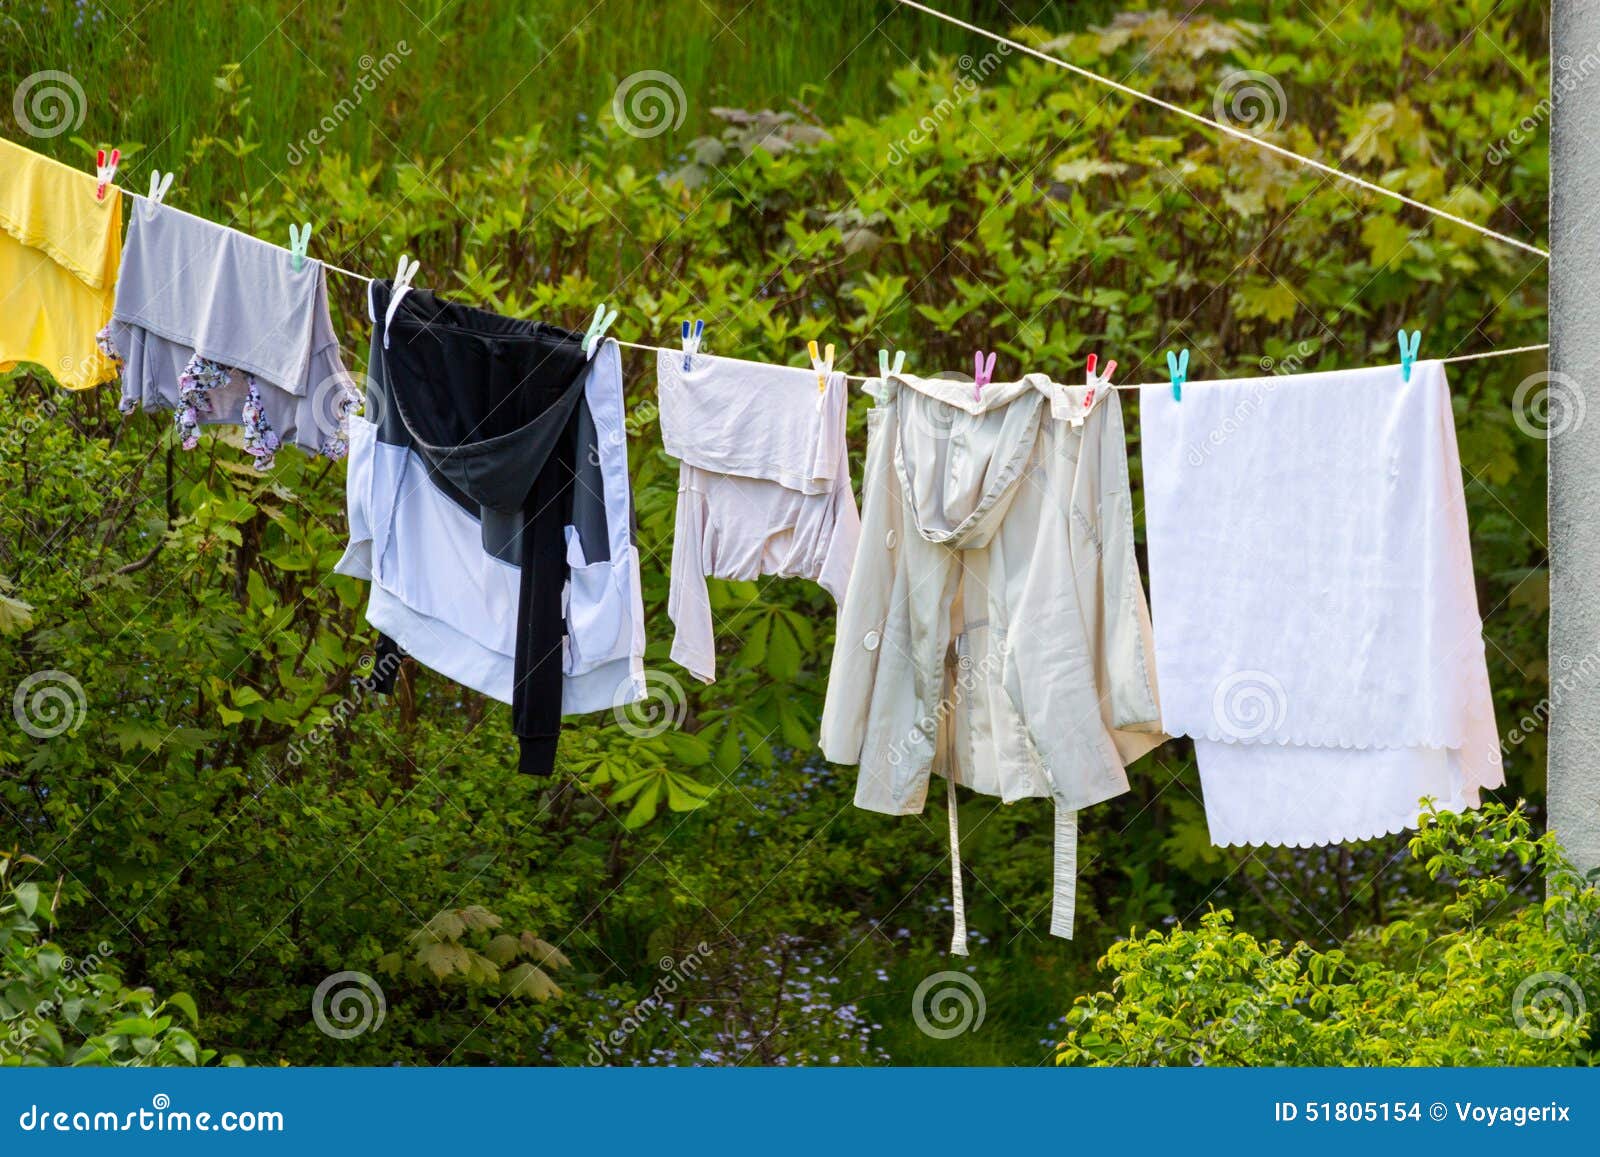 https://thumbs.dreamstime.com/z/clean-laundry-hanging-to-dry-line-outdoor-housework-wet-clothes-clothesline-rural-scene-51805154.jpg